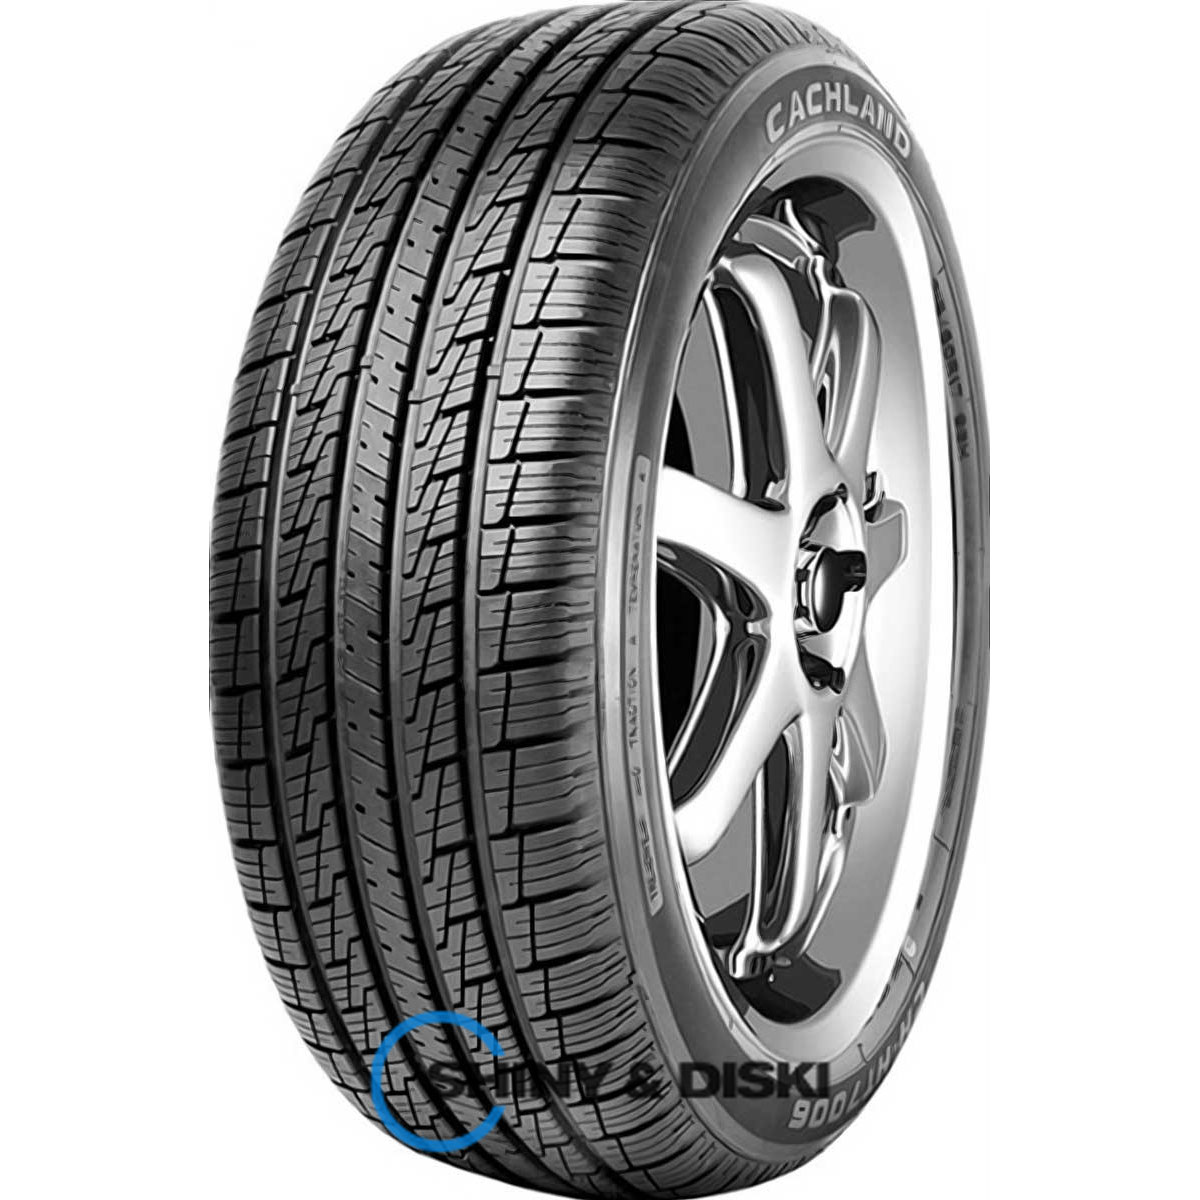 cachland ch-ht7006 275/70 r16 114h